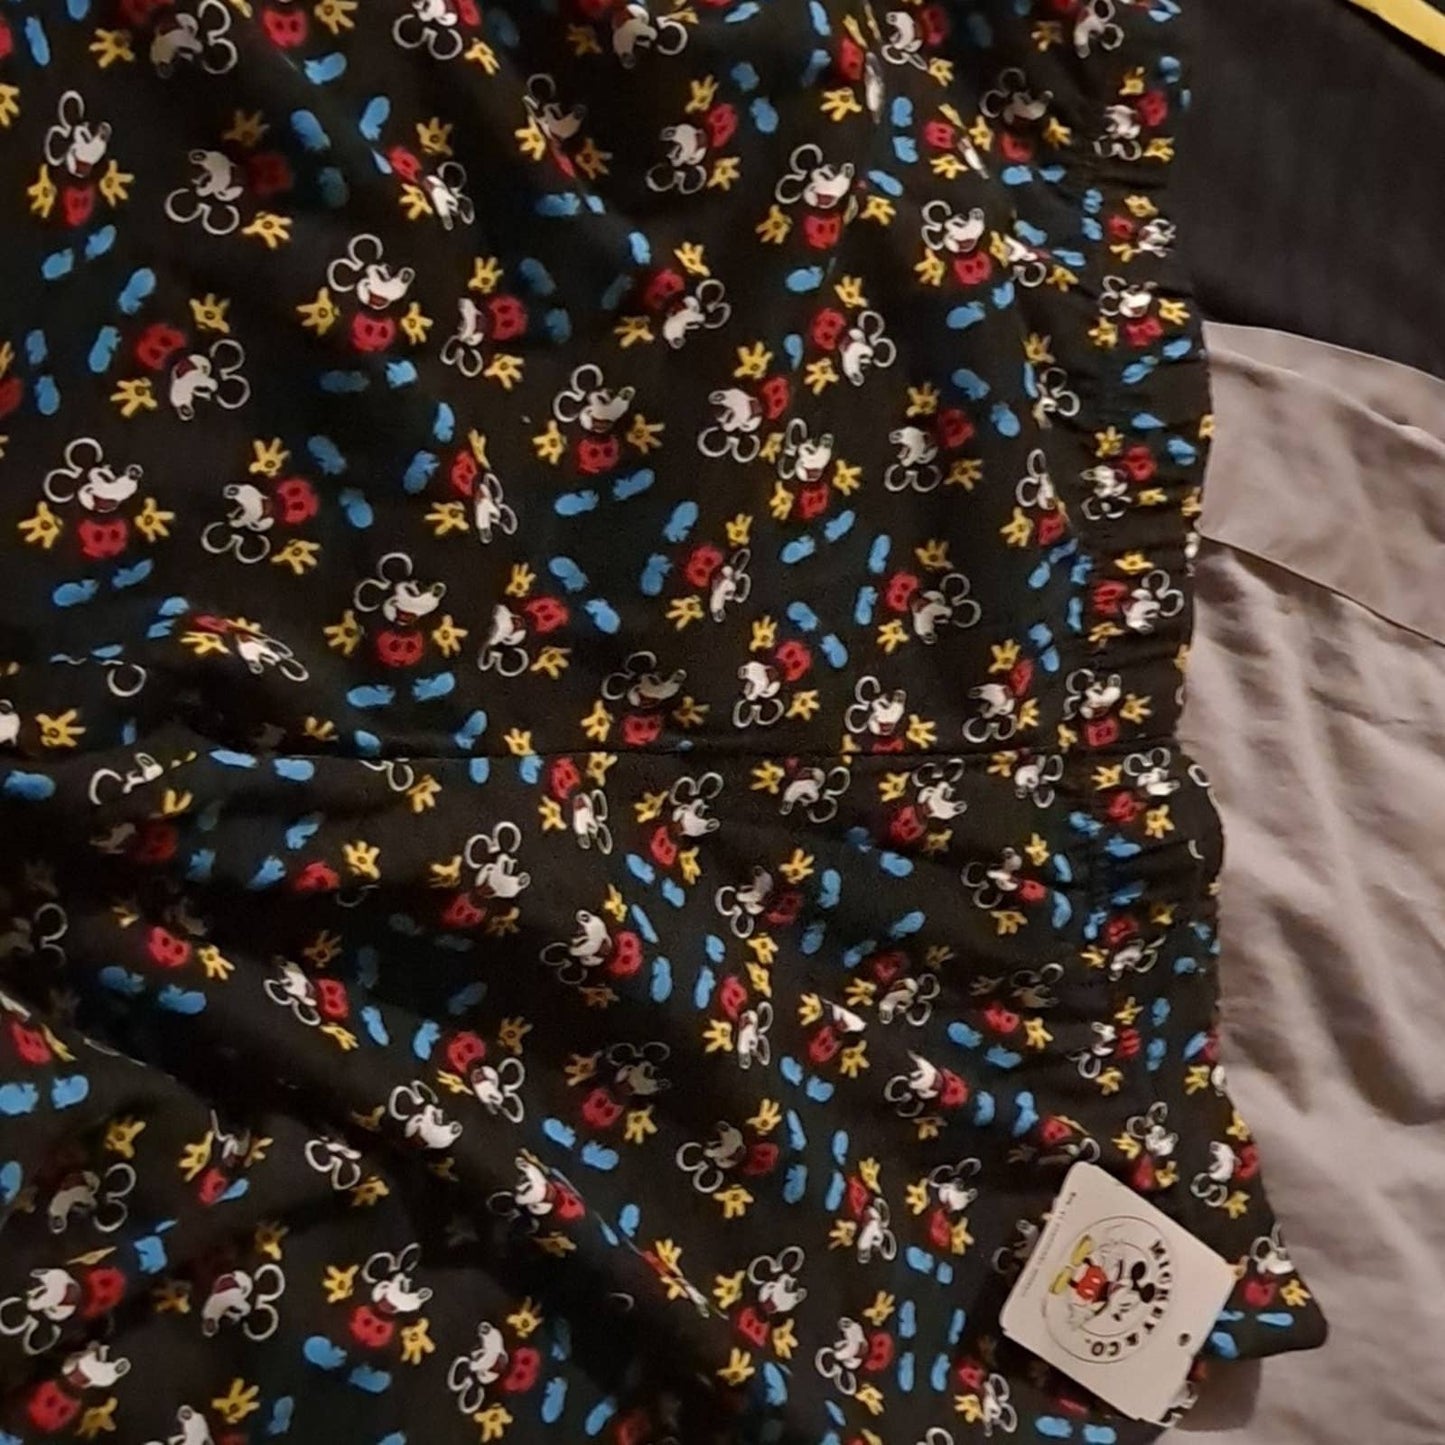 Mickey Mouse colorful leggings - Ankle length. New